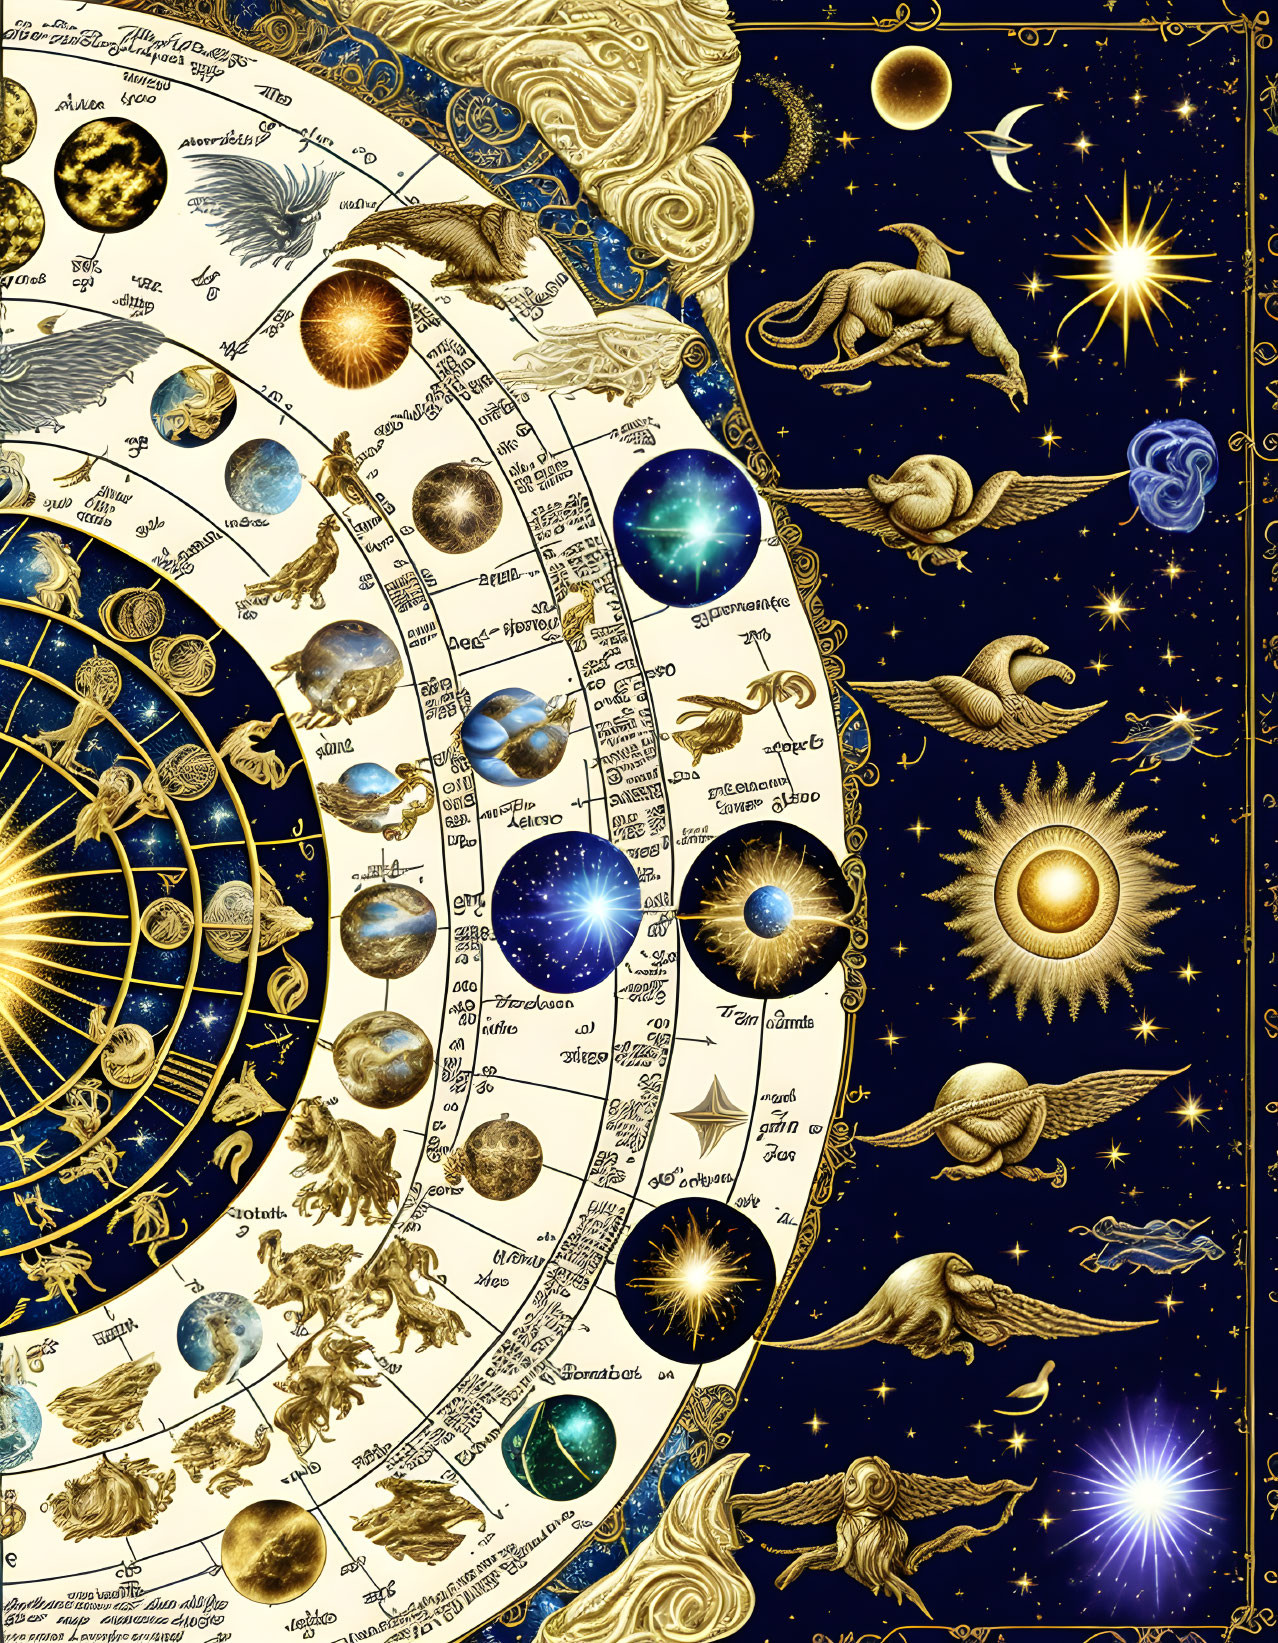 Celestial Map Featuring Zodiac Signs, Planets, Stars, and Mythological Figures